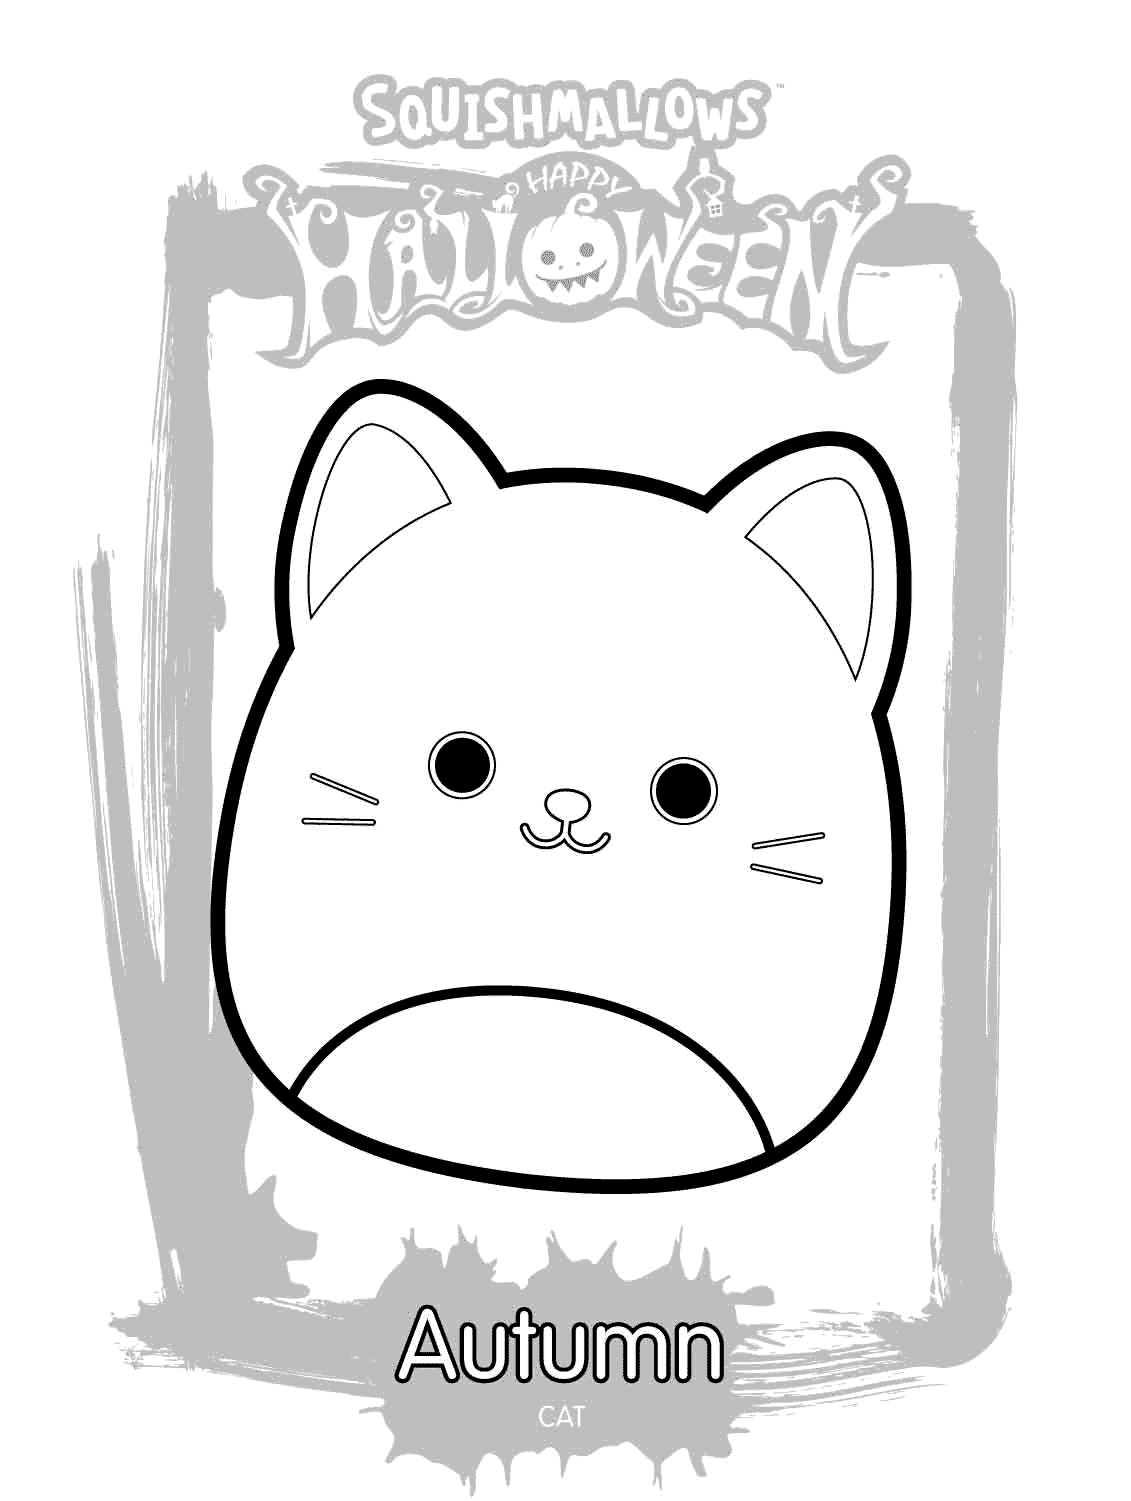 Squishmallows Autumn Coloring Page